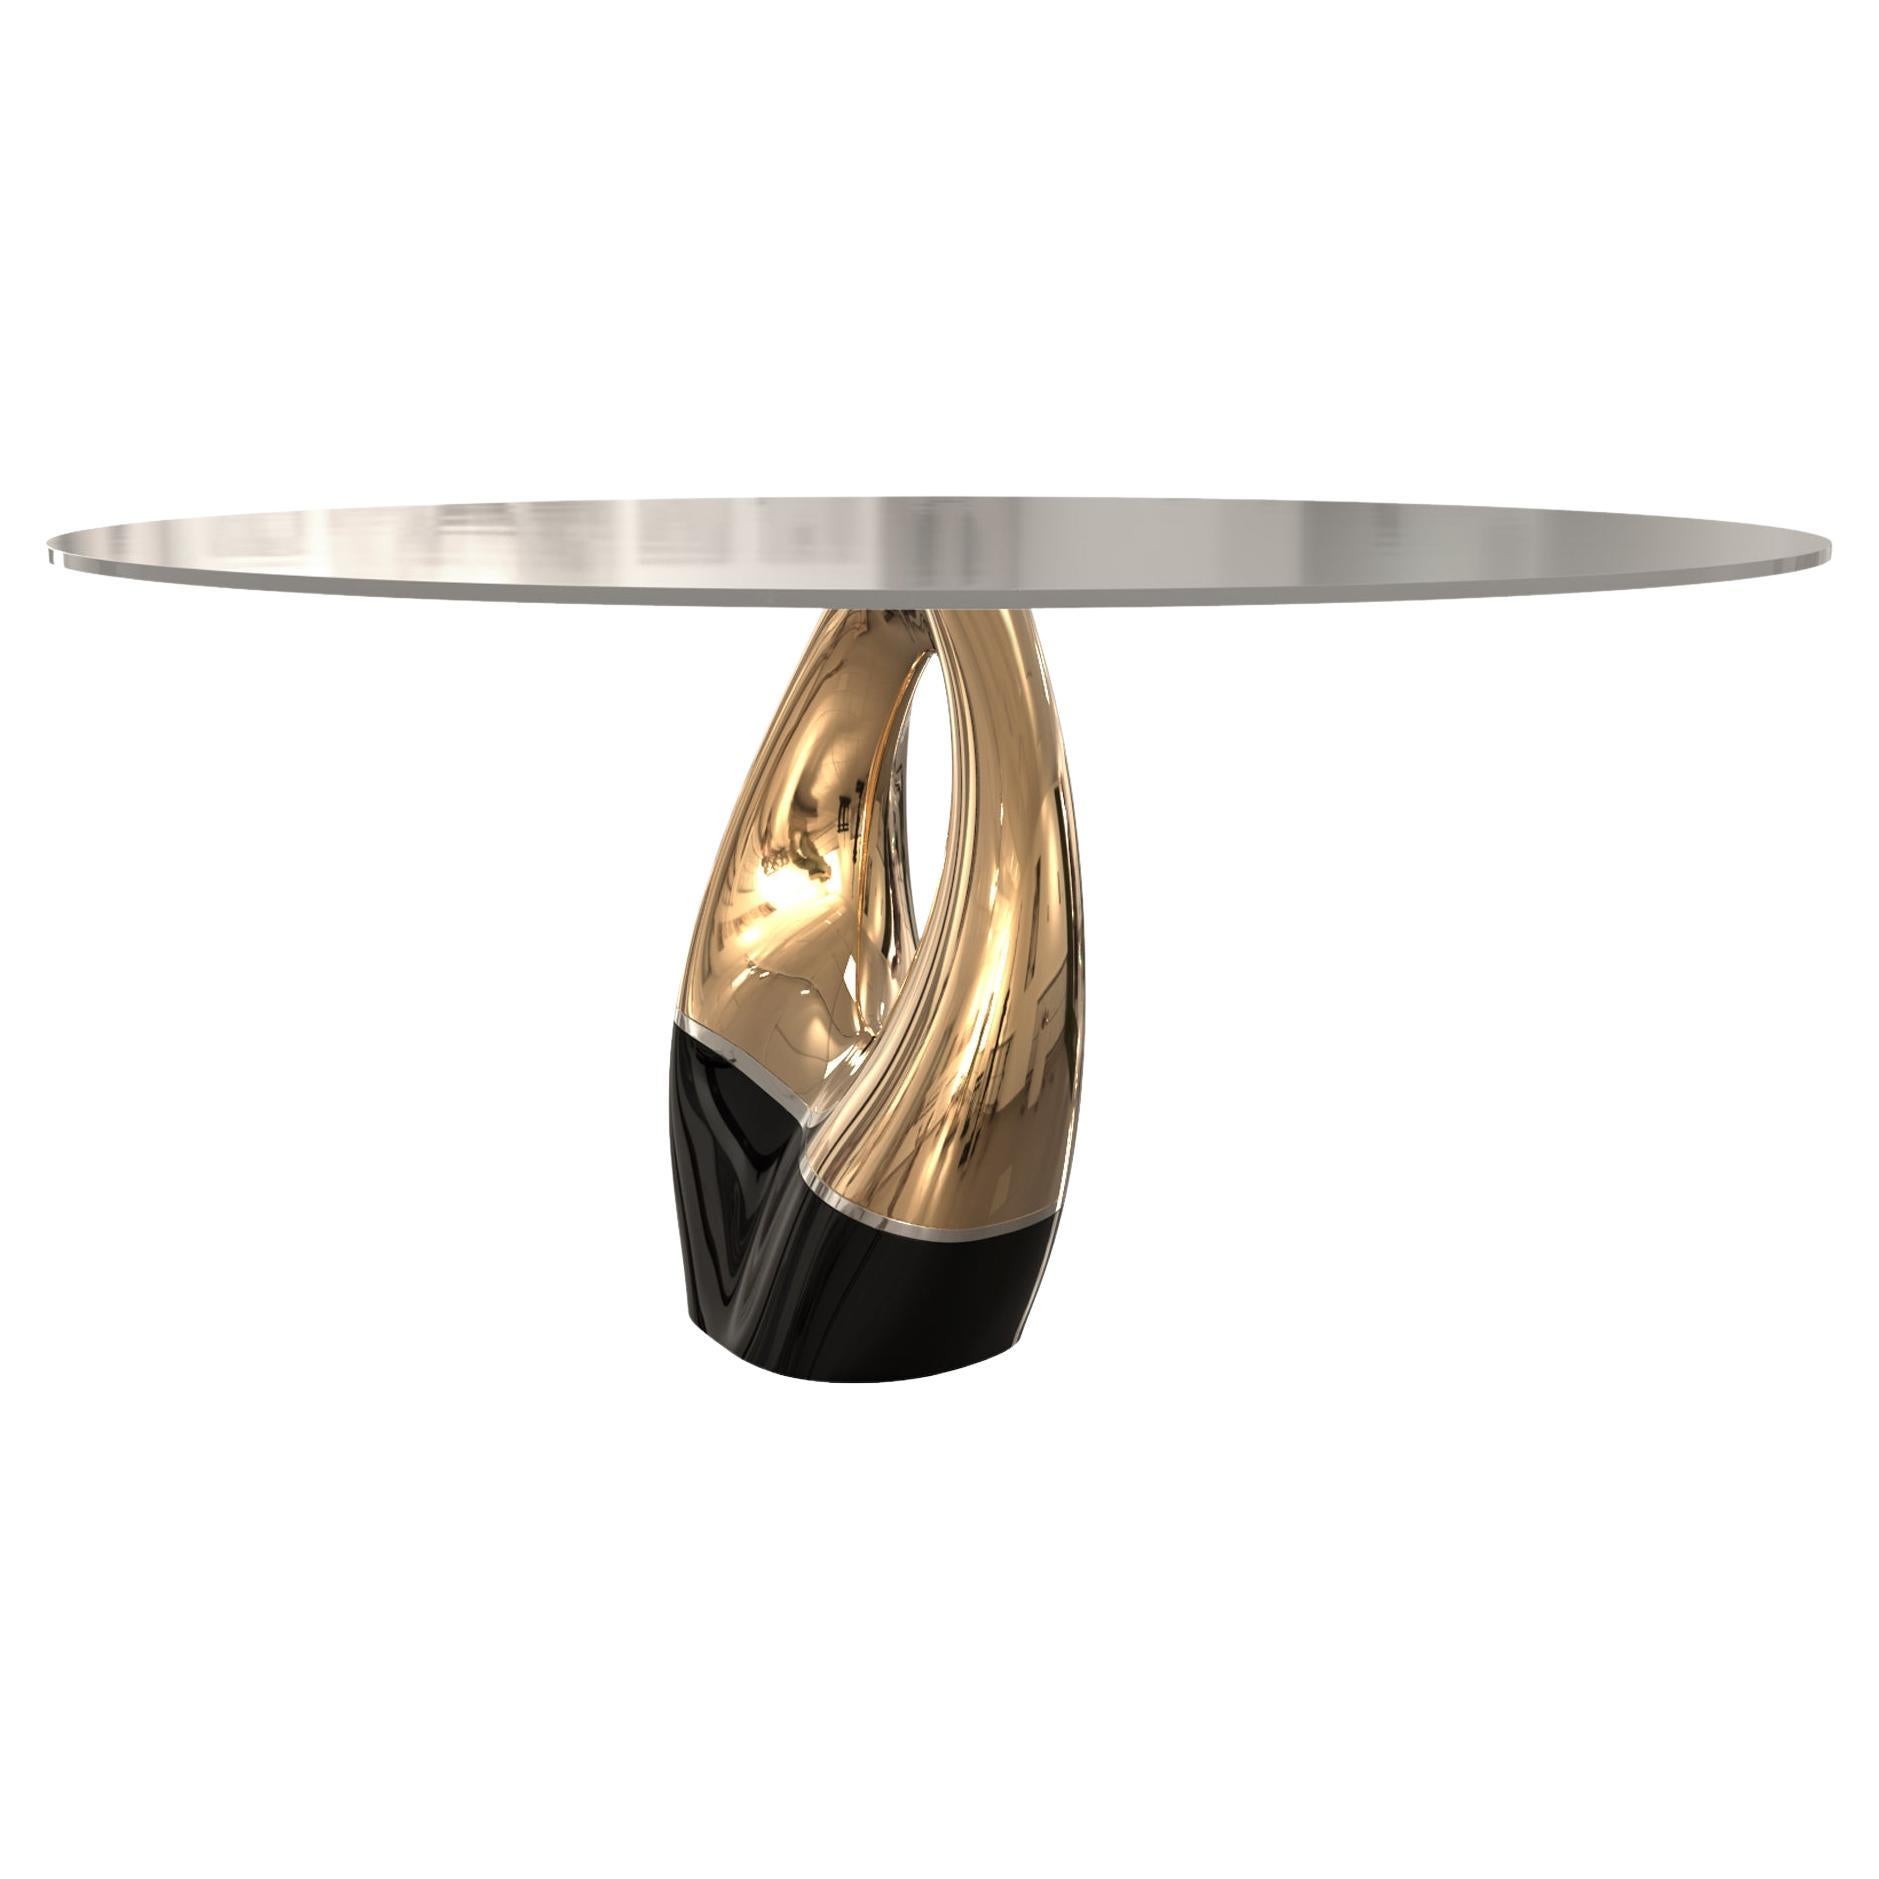 "The Passione" Round Dining or Entryway Table with Bronze and Stainless Steel For Sale